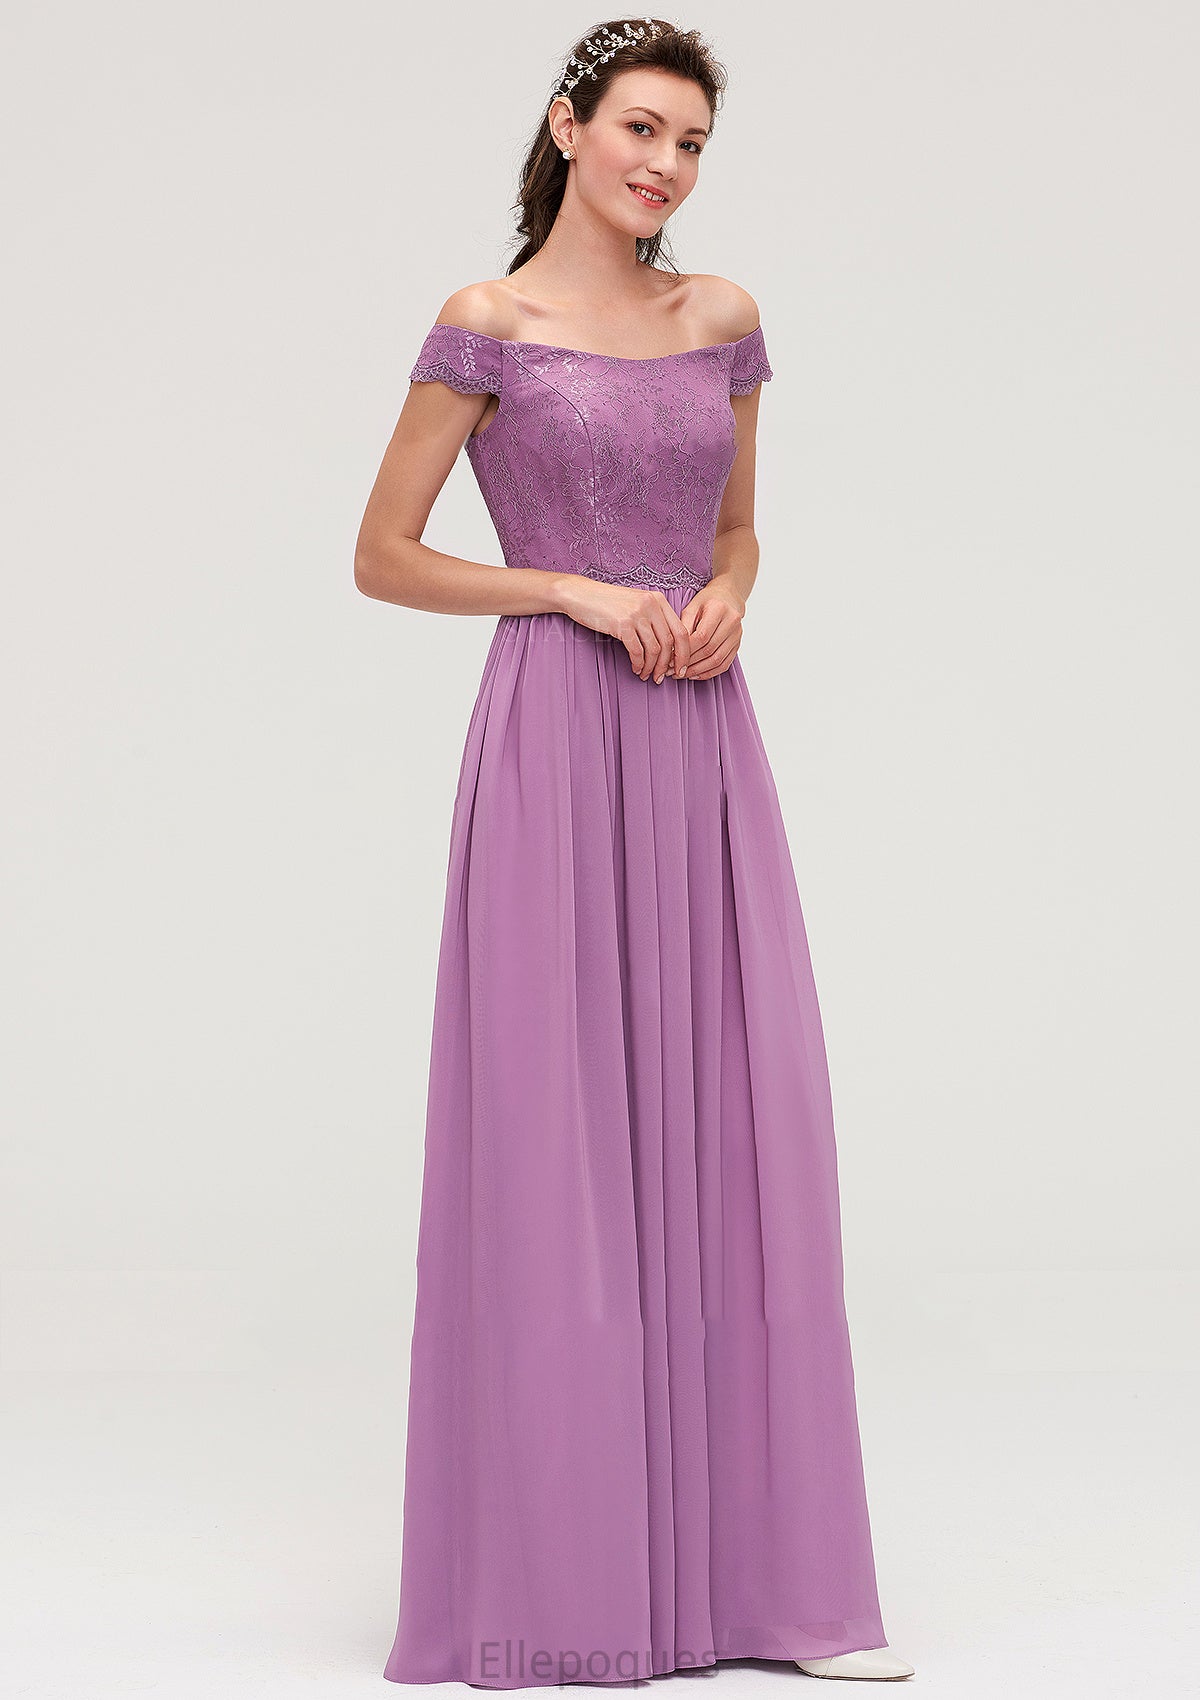 Sleeveless Off-the-Shoulder Long/Floor-Length Chiffon A-line/Princess Bridesmaid Dresseses With Appliqued Violet HOP0025442